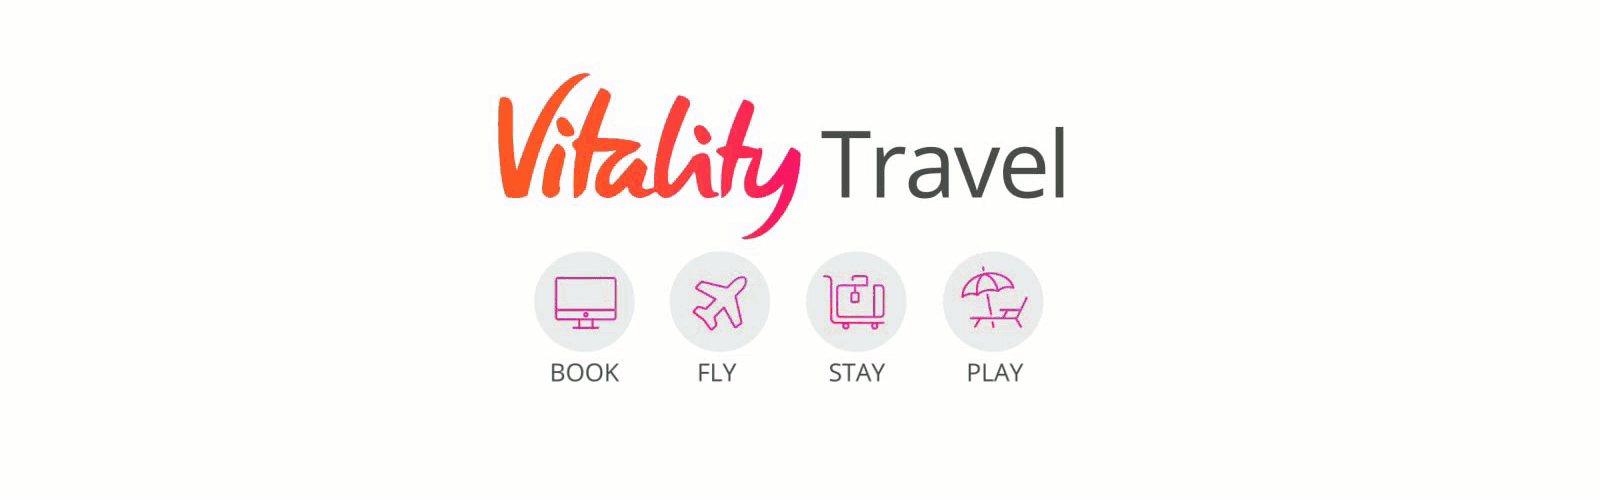 how to access vitality travel